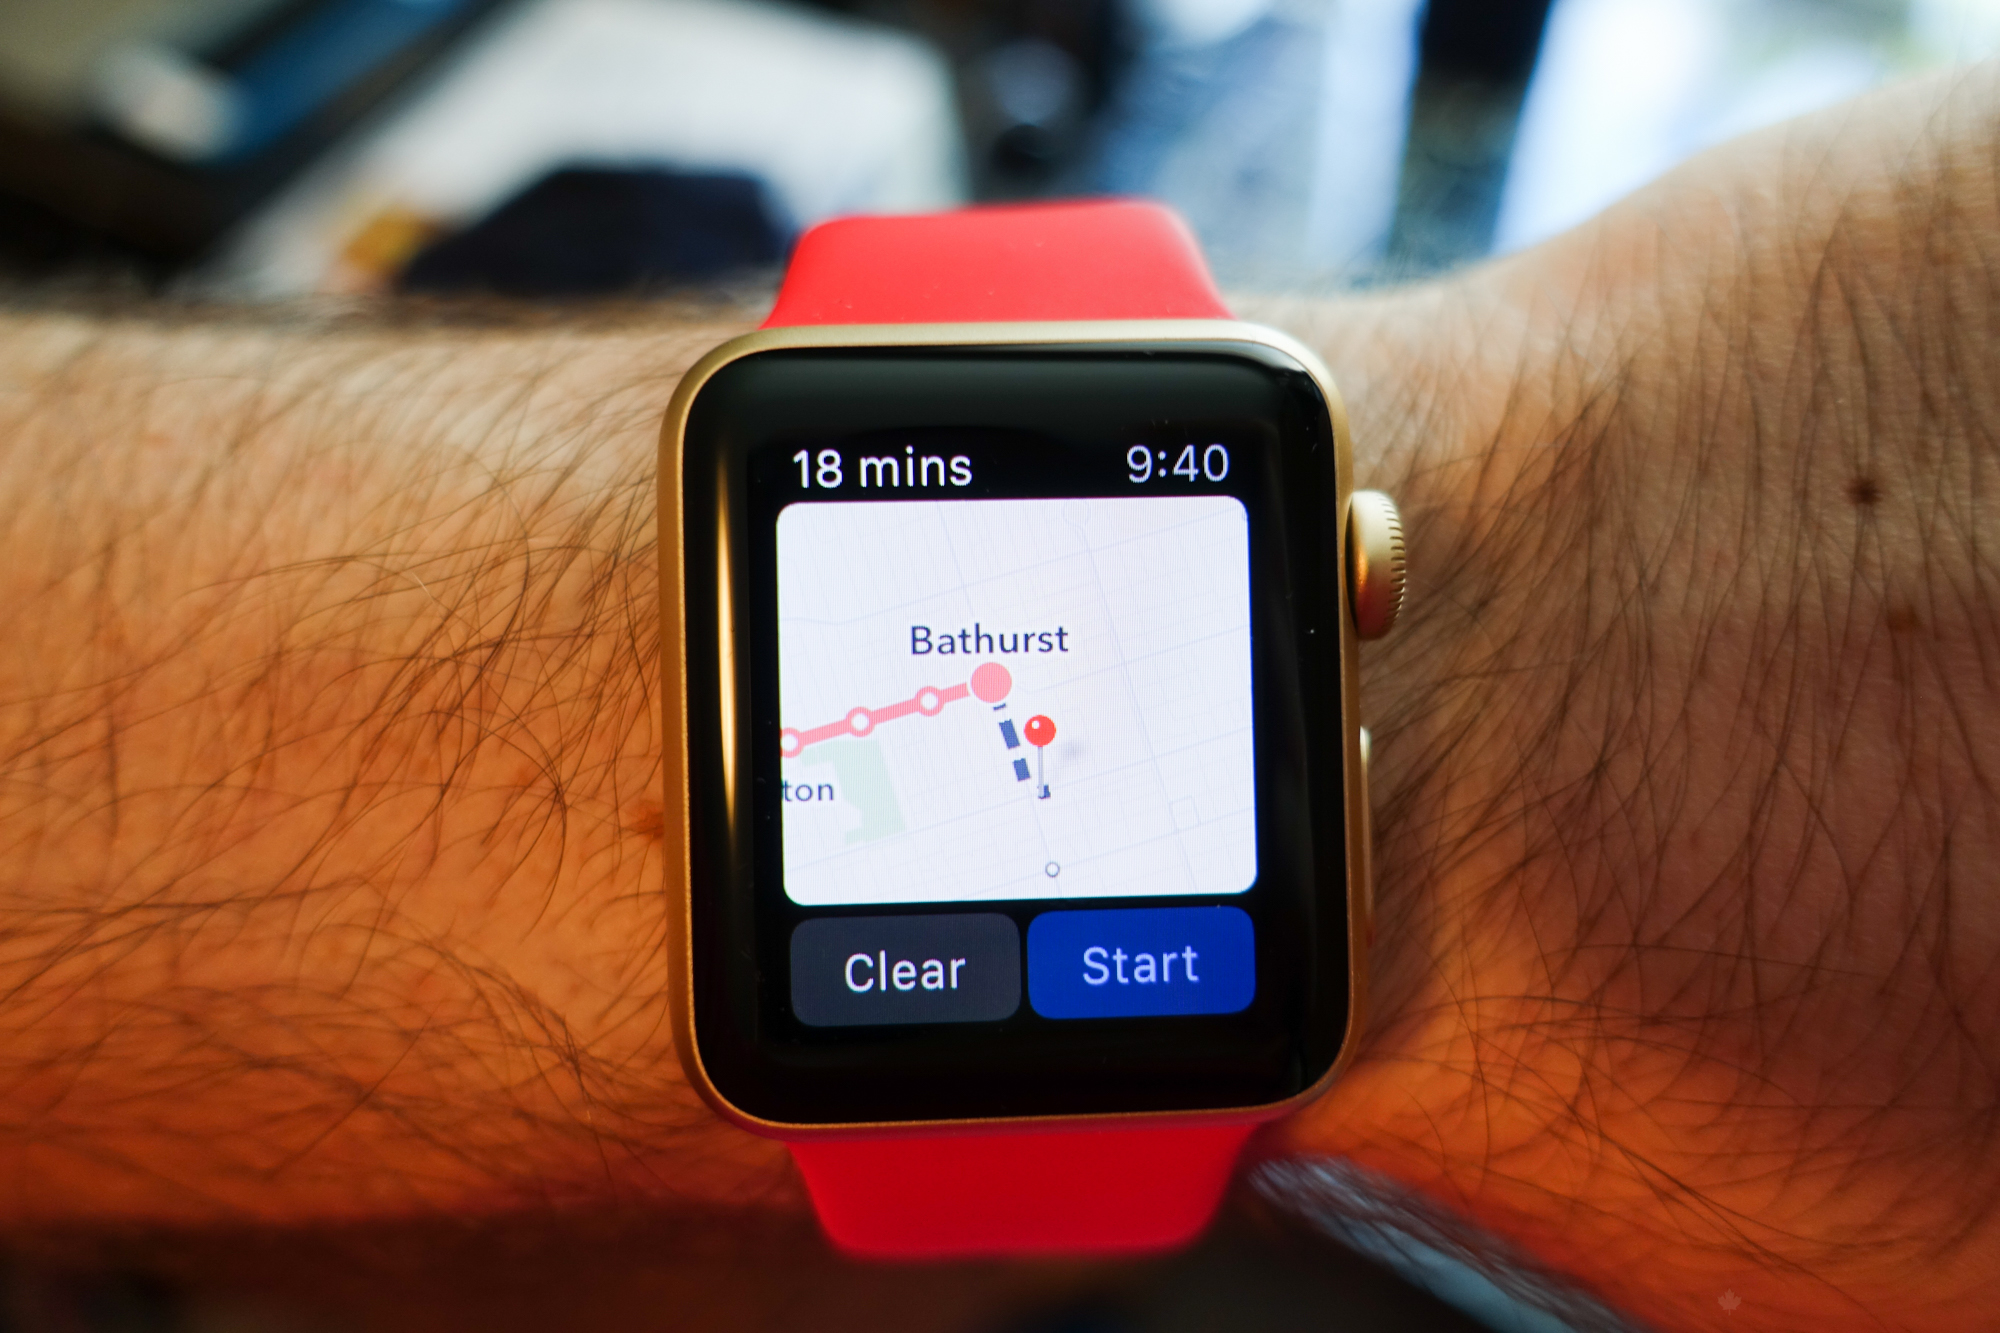 applewatchos2review-01232